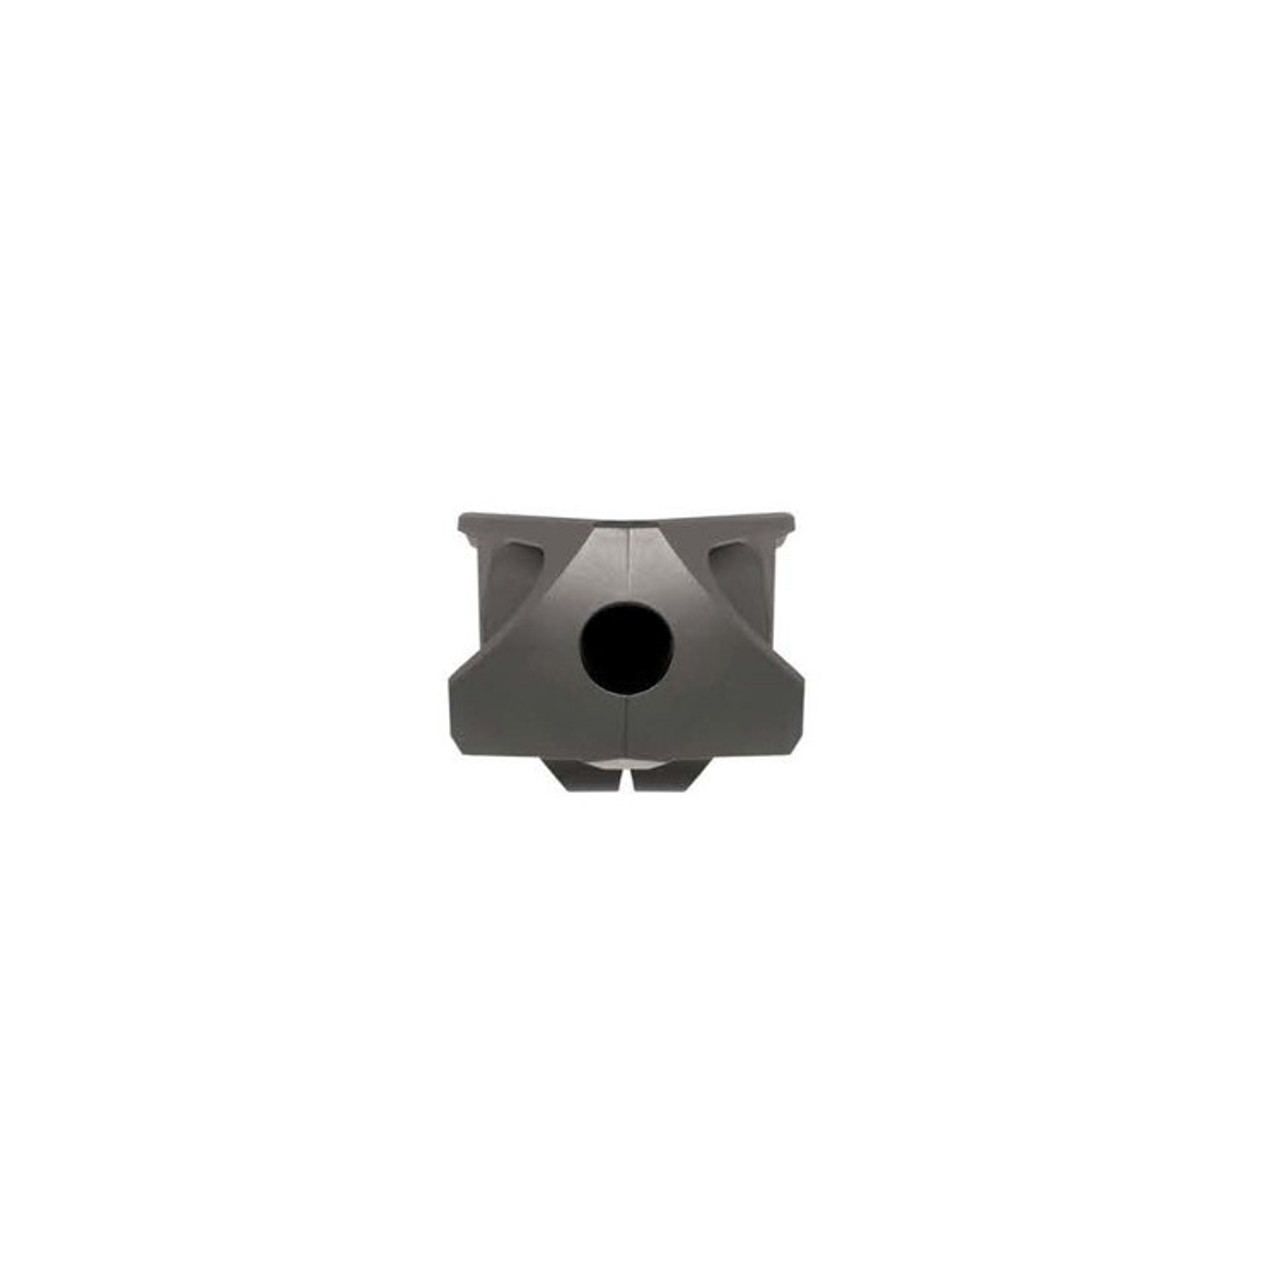 Cadex MX1 Muzzle Brake Black (3/4-20 thrd) 3850-022 Open Box Small Chip in  paint UA4855 For Sale! 